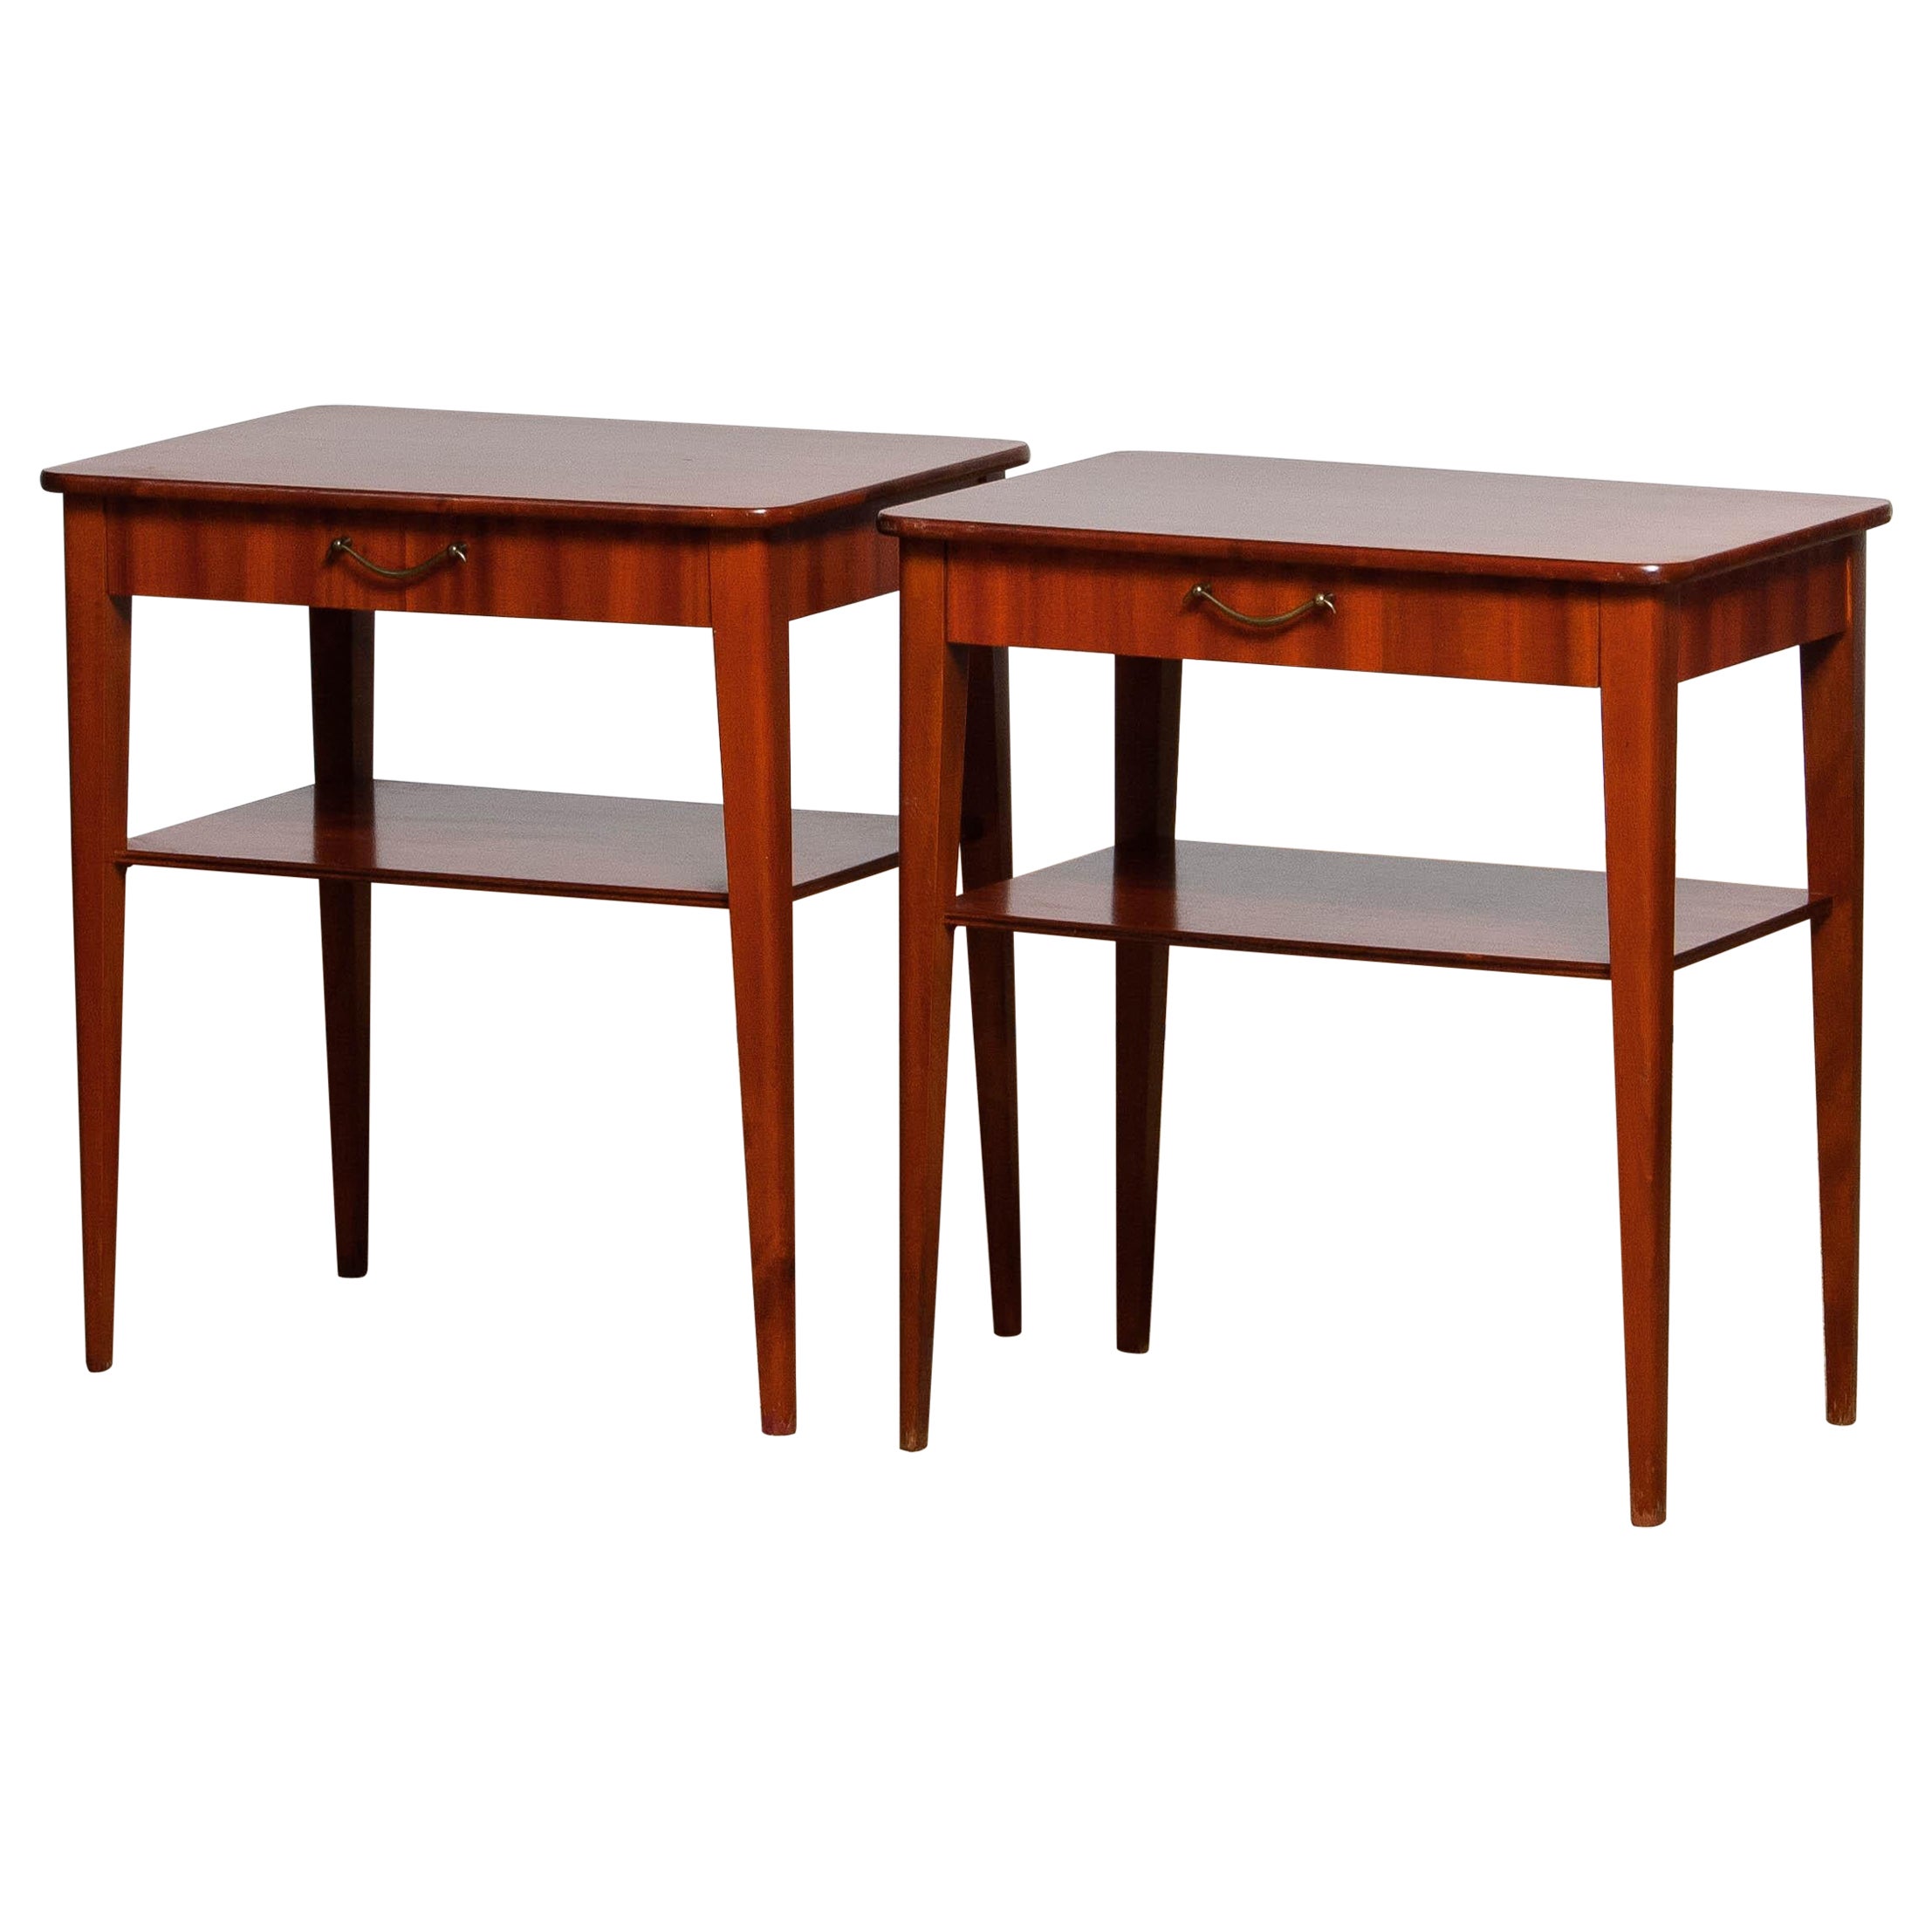 1960's Pair Slim Scandinavian Mahogany Night Stands / Bedside Tables from Sweden